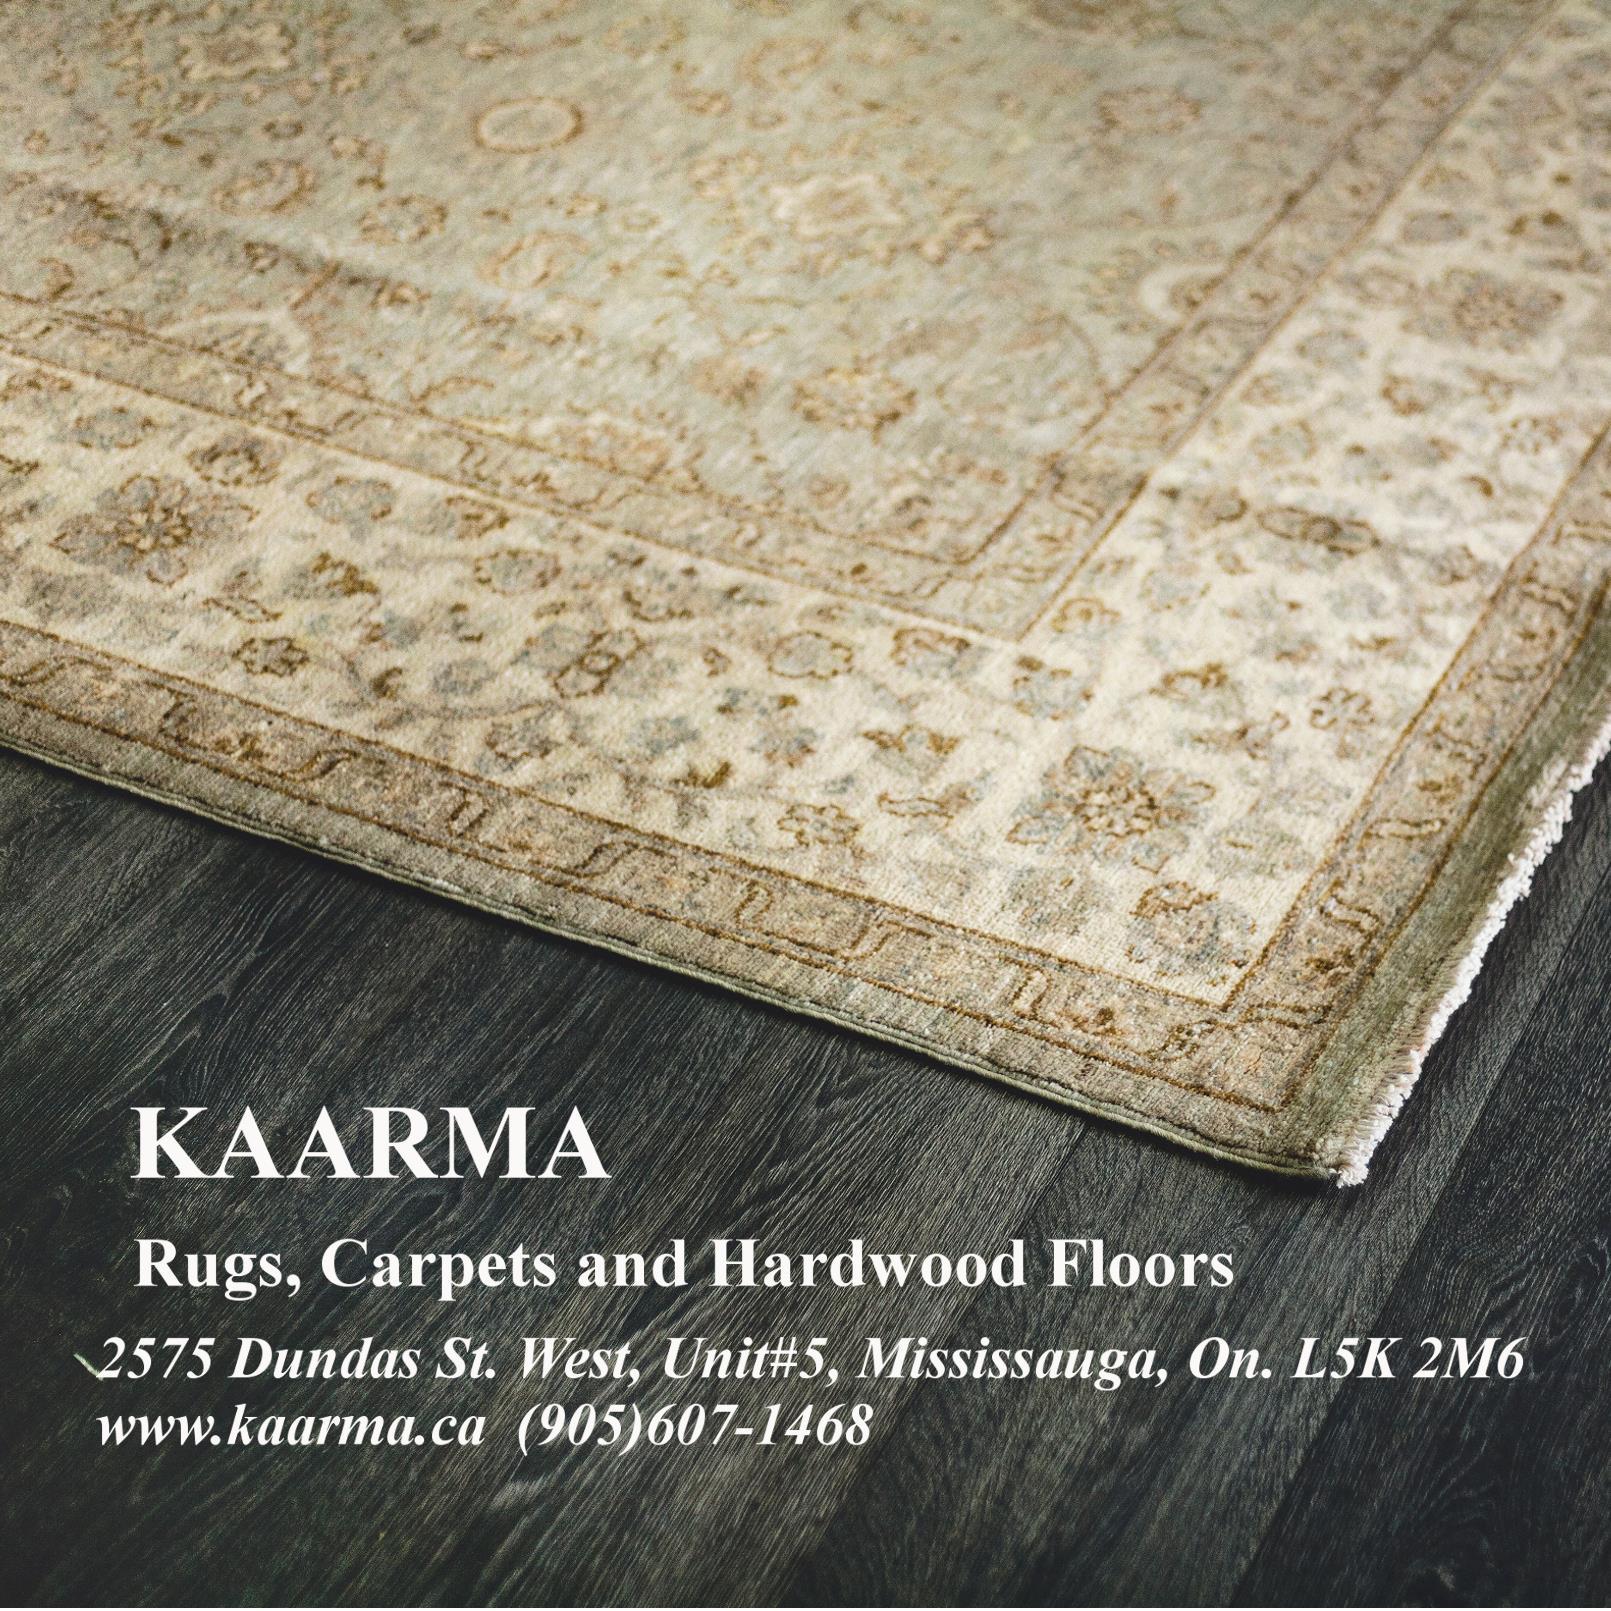 KAARMA offer high quality area rugs and carpet. Located in Mississauga Home and Design Centre at 5-2575 Dundas St. West, Mississauga, On. Canada.